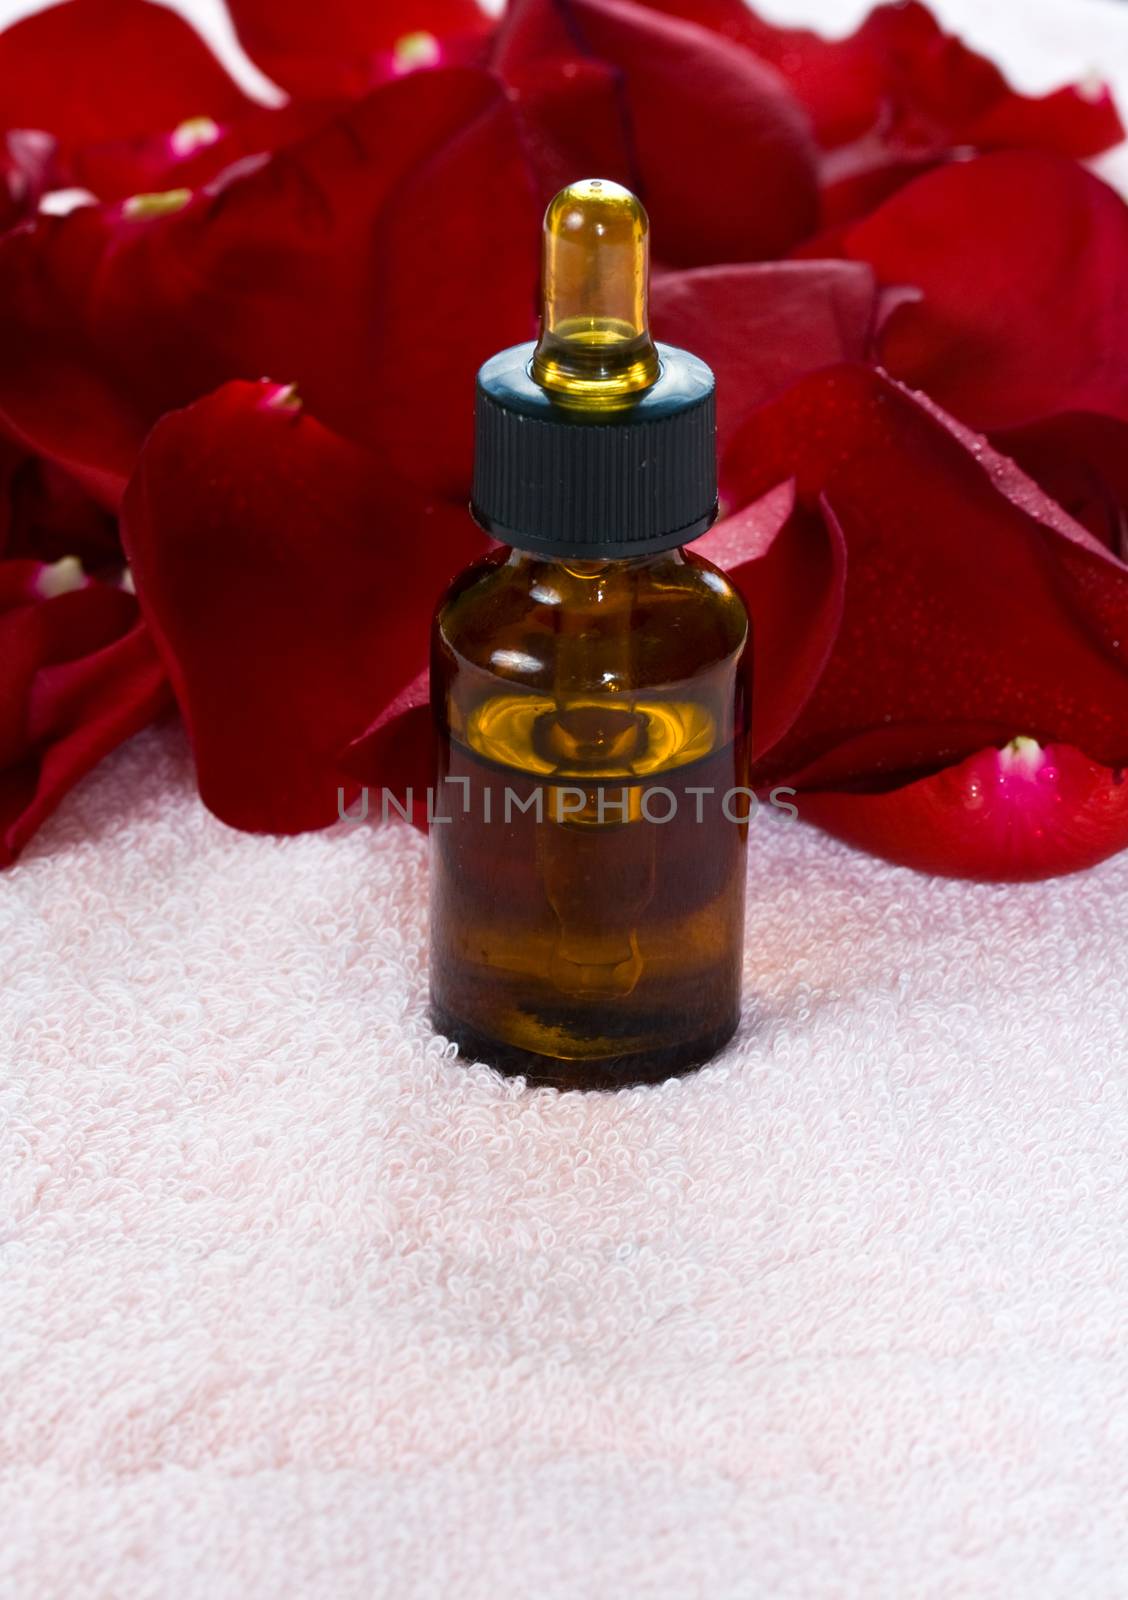 Wellness care products rose oil by Irina1977